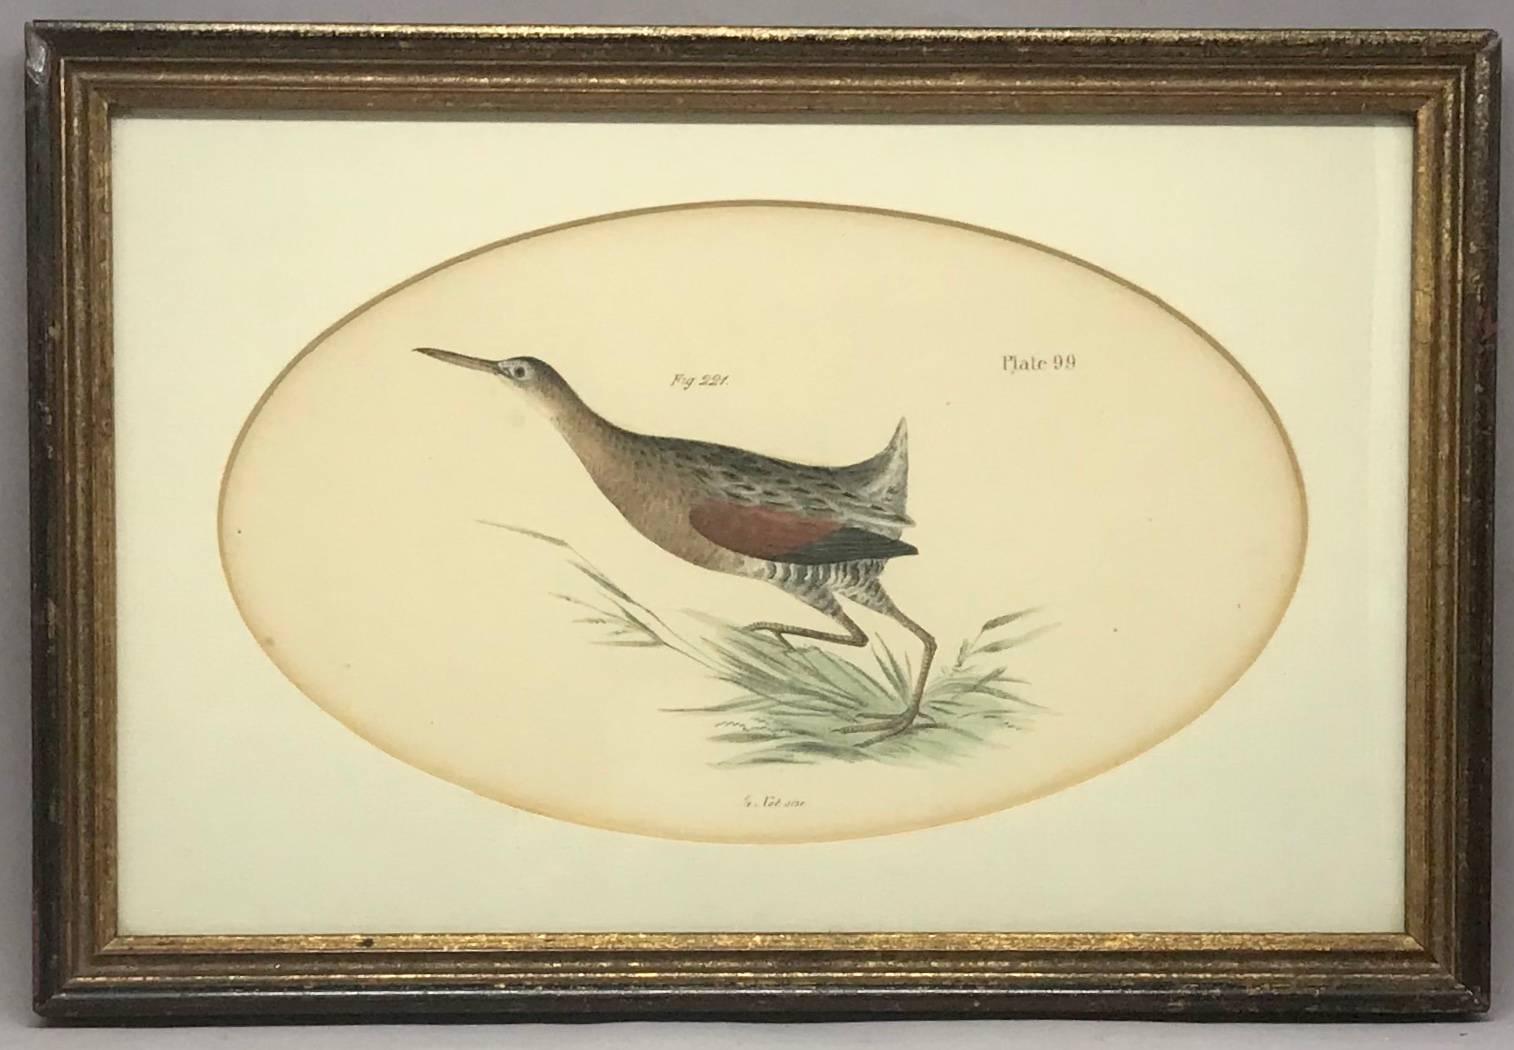 Pair American hand-colored bird lithographs. Pair framed bird lithographs under oval mats by artist J.W. Hill and publisher George Endicott, NY. United States, late 19th century